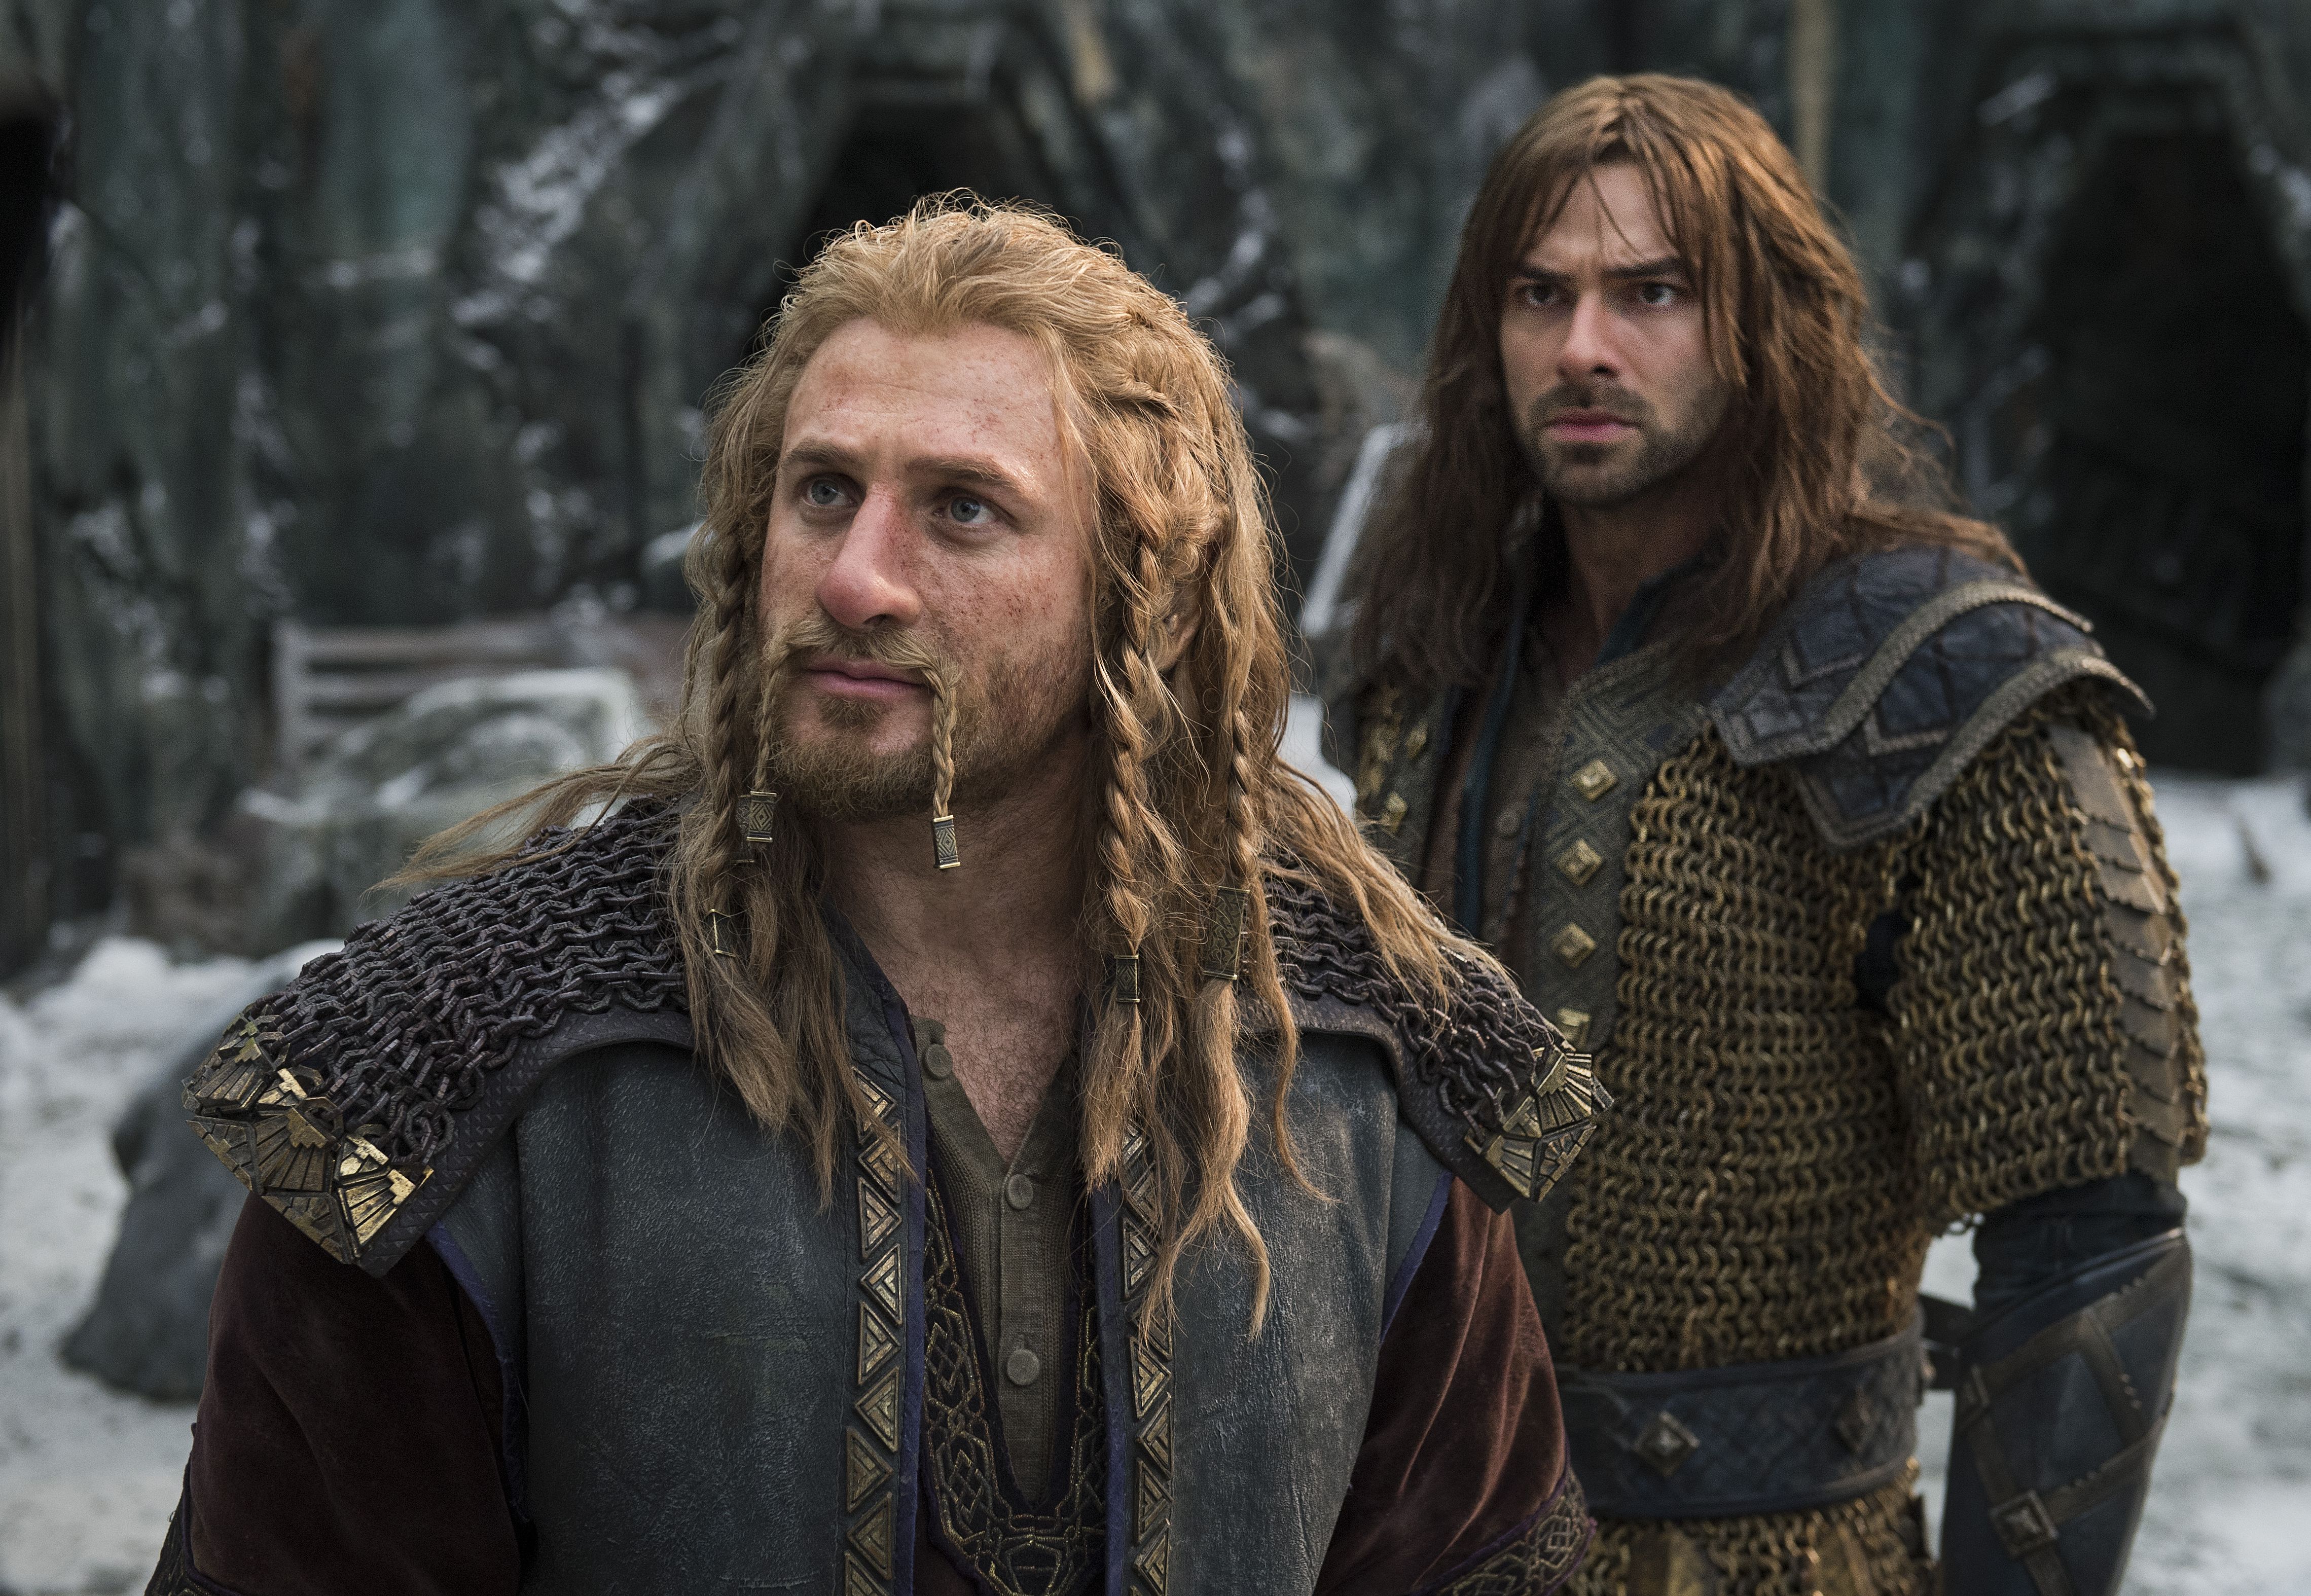 Kili and Fili in The Battle of the Five Armies